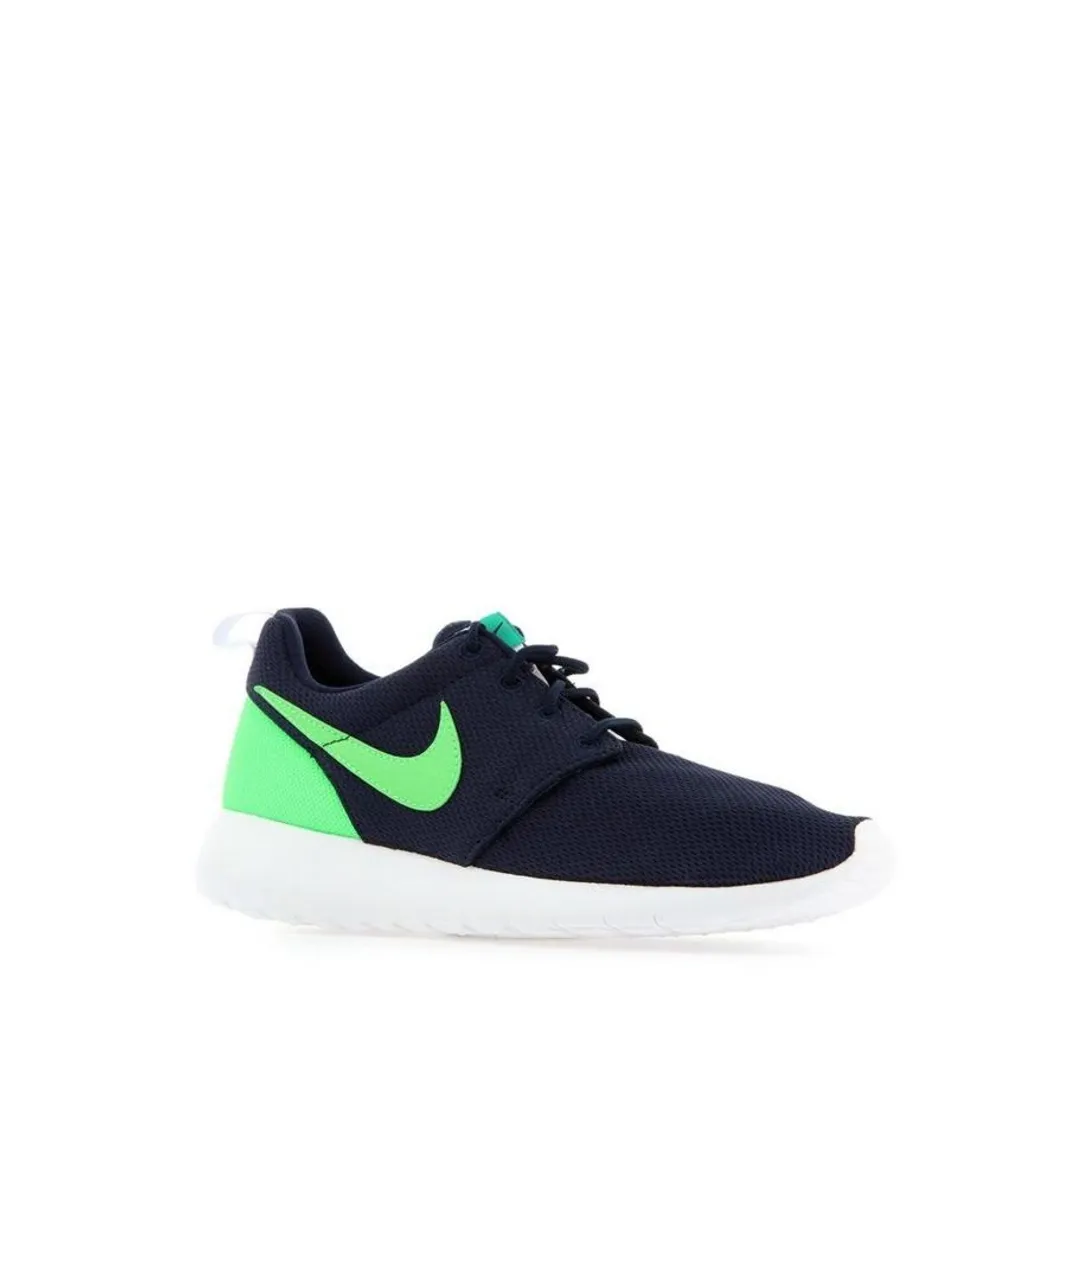 Nike Childrens Unisex Roshe One (GS) Lace Up Blue Synthetic Kids Trainers 599728 413